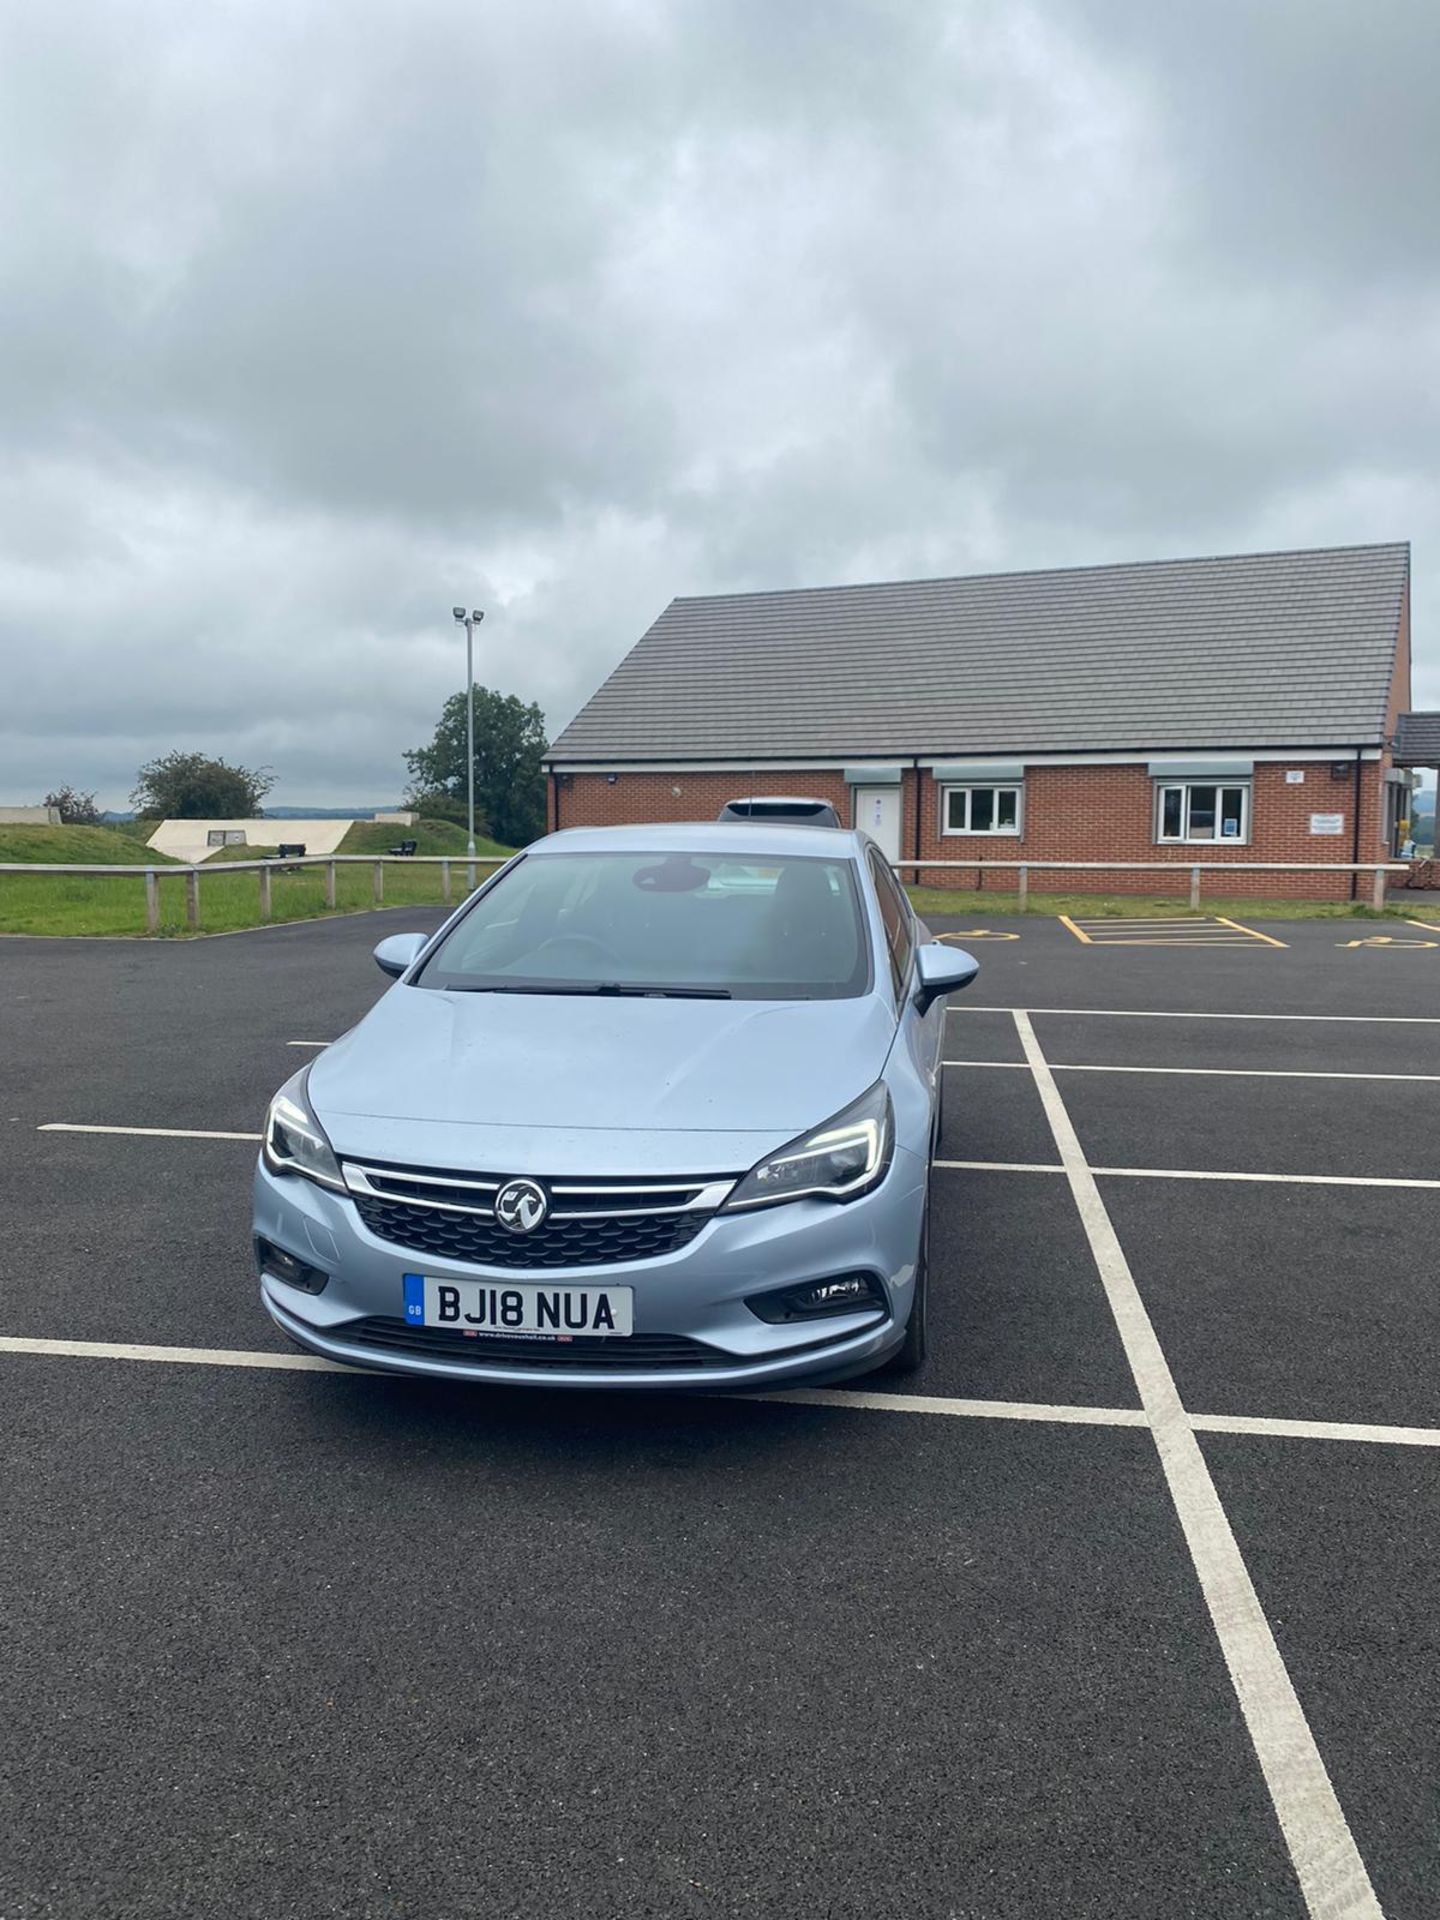 2018/18 REG VAUXHALL ASTRA SRI TURBO 1.4 PETROL SILVER 5 DOOR HATCHBACK, SHOWING 2 FORMER KEEPERS - Image 2 of 12